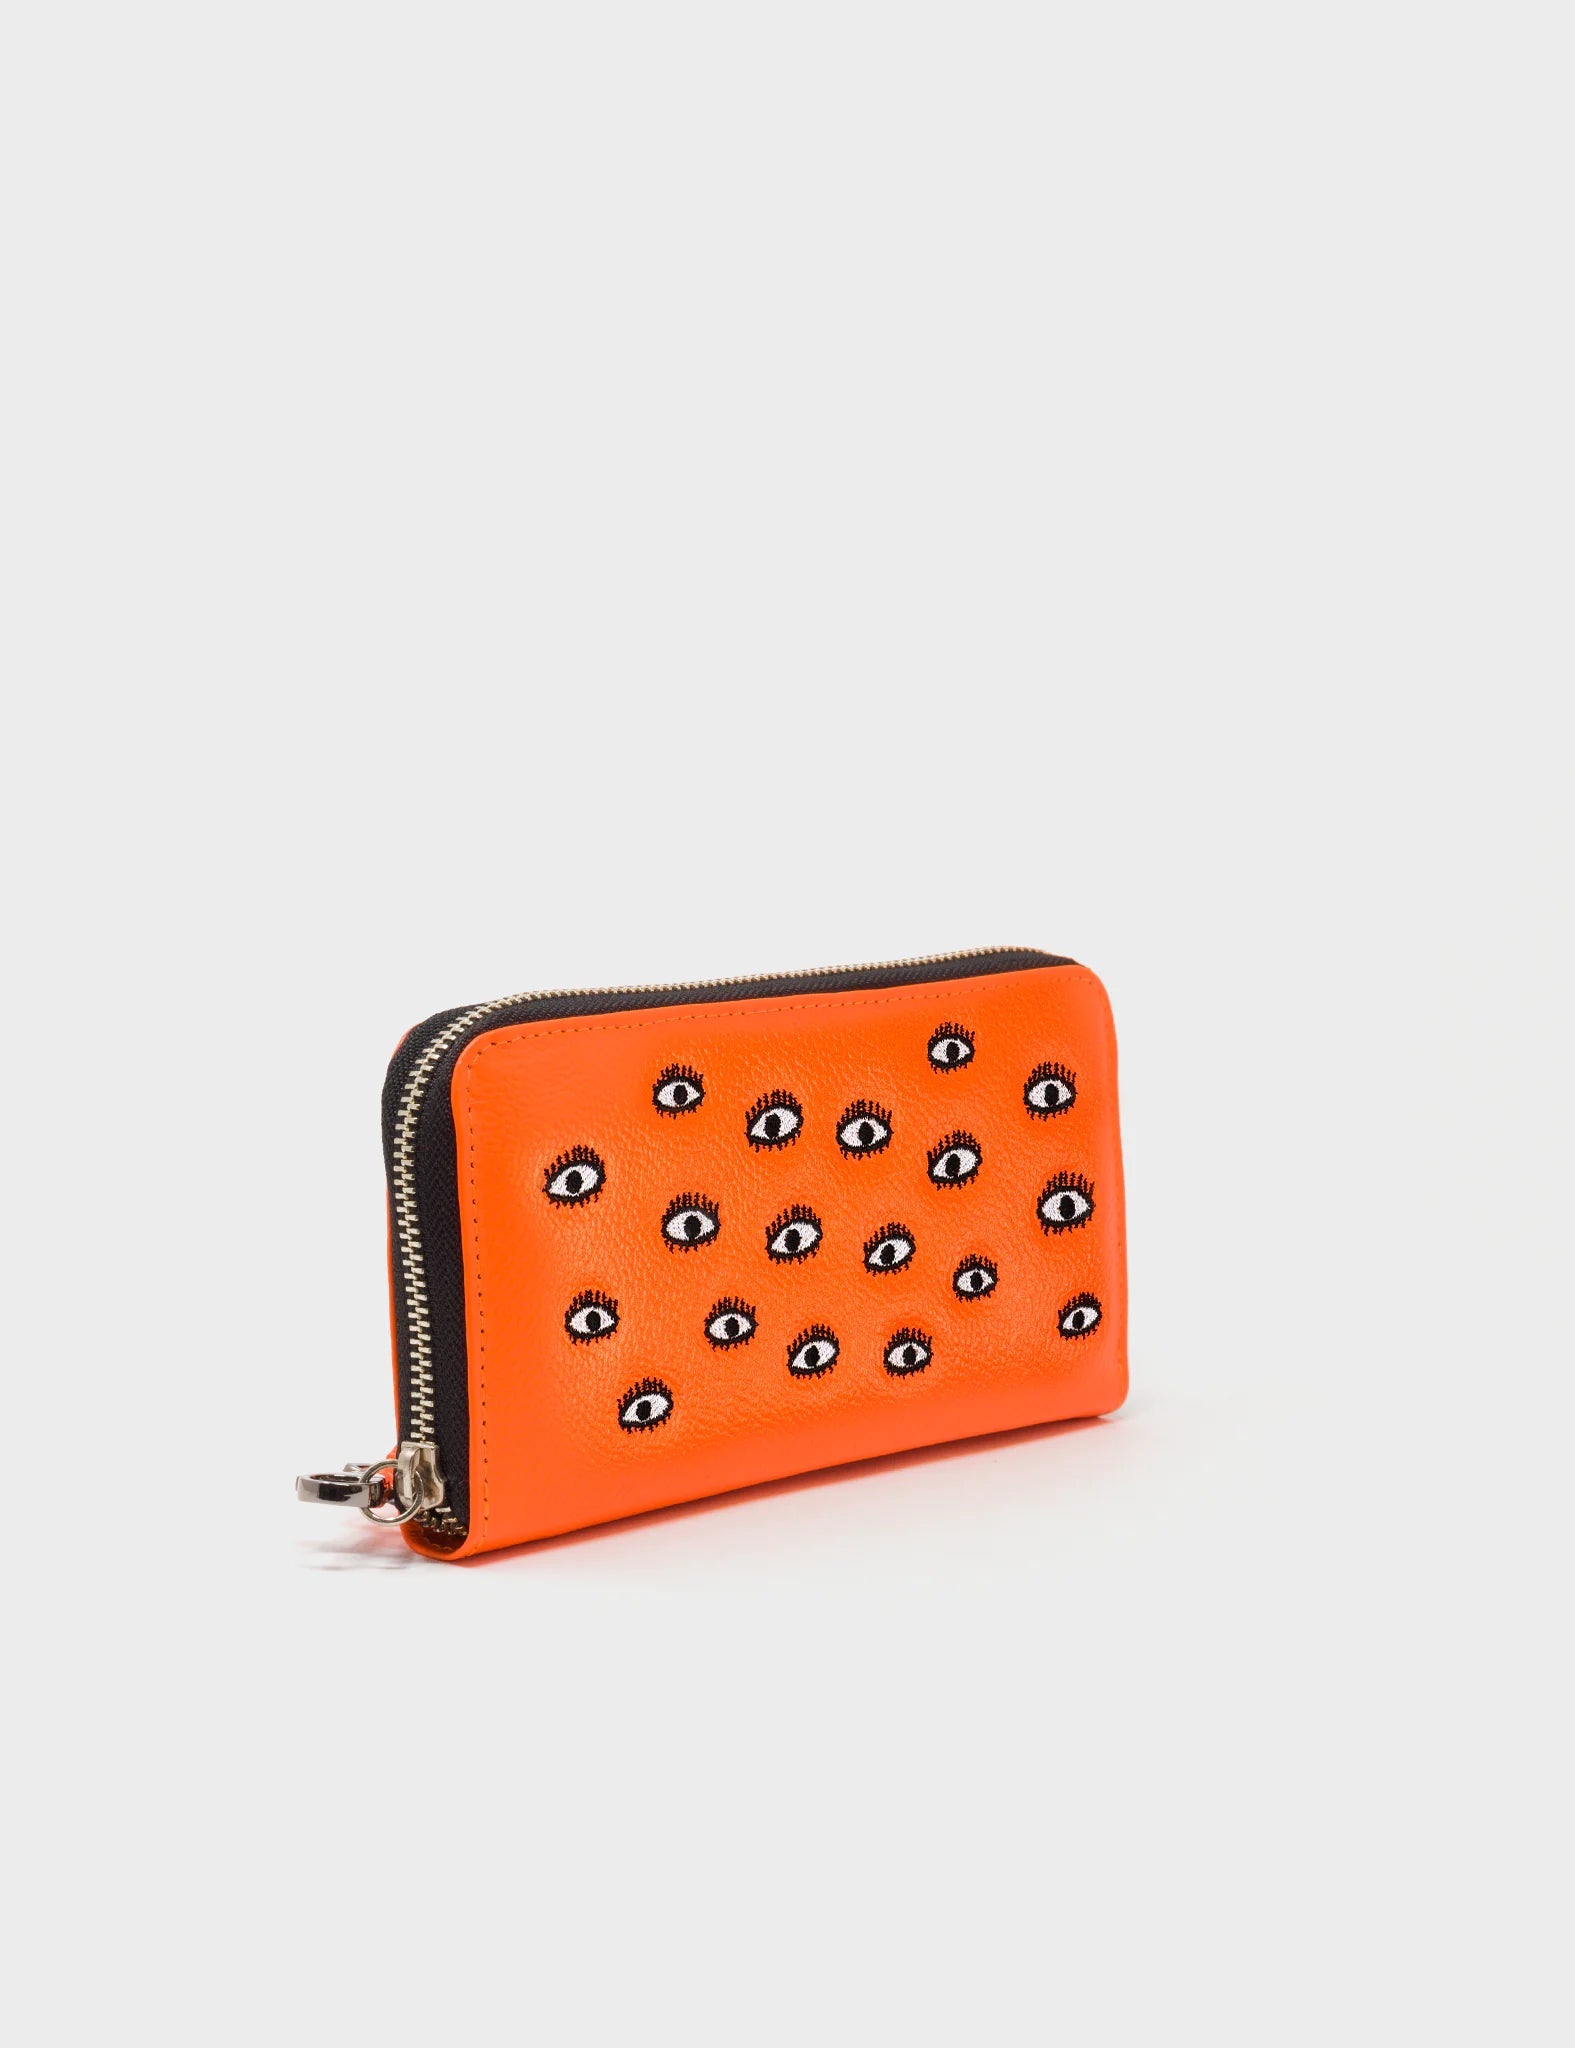 Francis Neon Orange Leather Wallet - All Over Eyes Embroidery Print - Front corner angle view